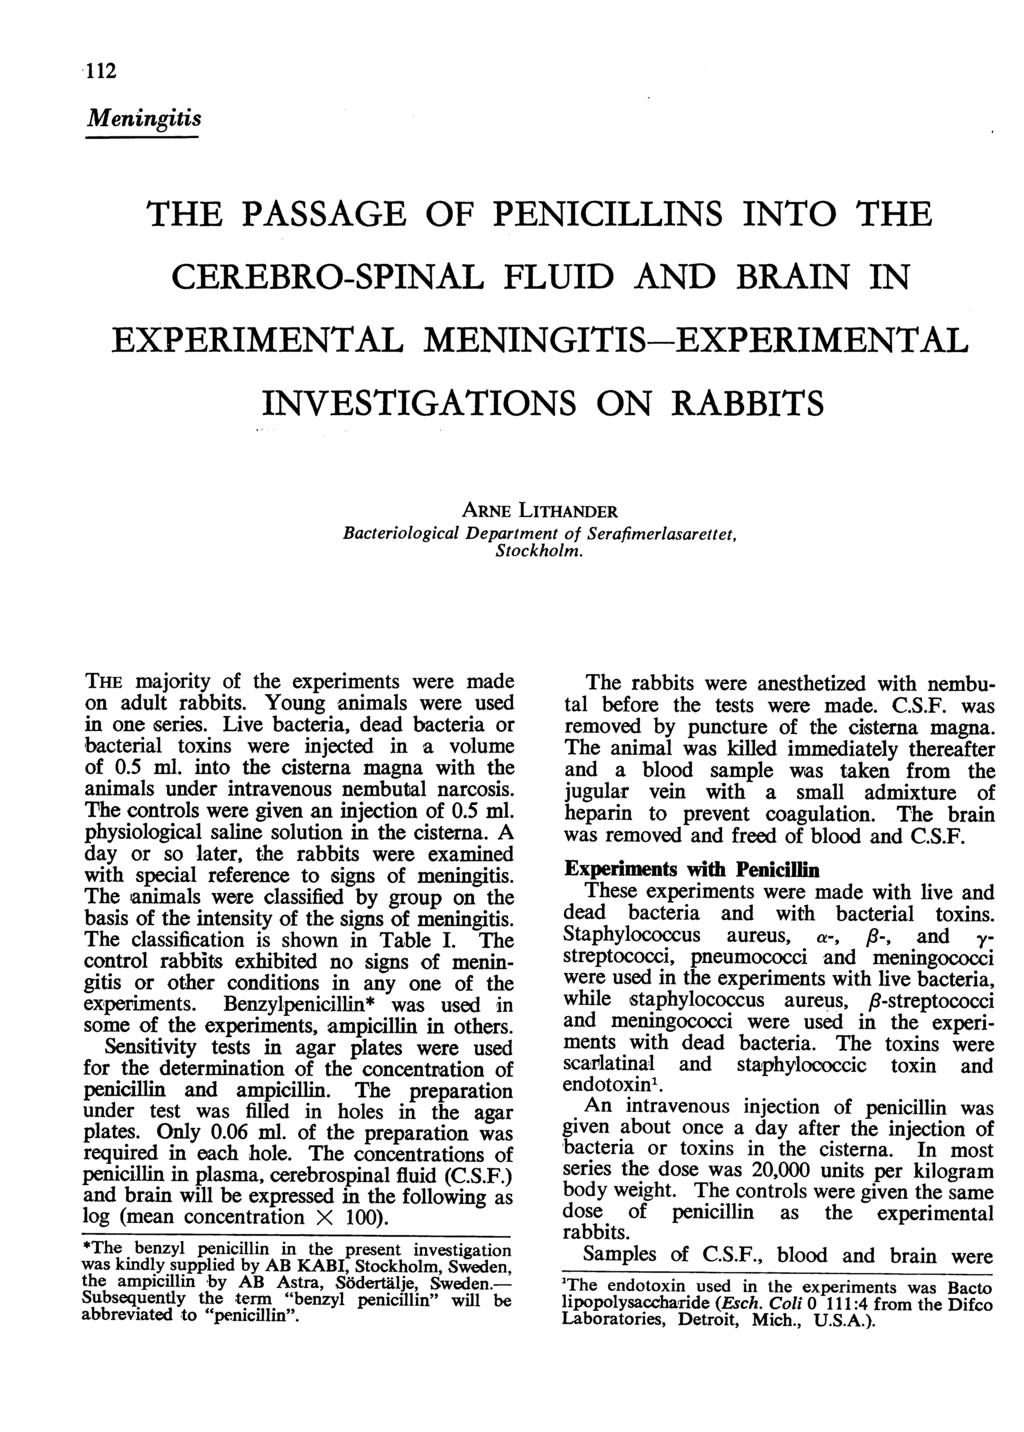 Meningitis THE PASSAGE OF PENICILLINS INTO THE CEREBRO-SPINAL FLUID AND BRAIN IN EXPERIMENTAL MENINGITIS-EXPERIMENTAL INVESTIGATIONS ON RABBITS THE majority of the experiments were made on adult